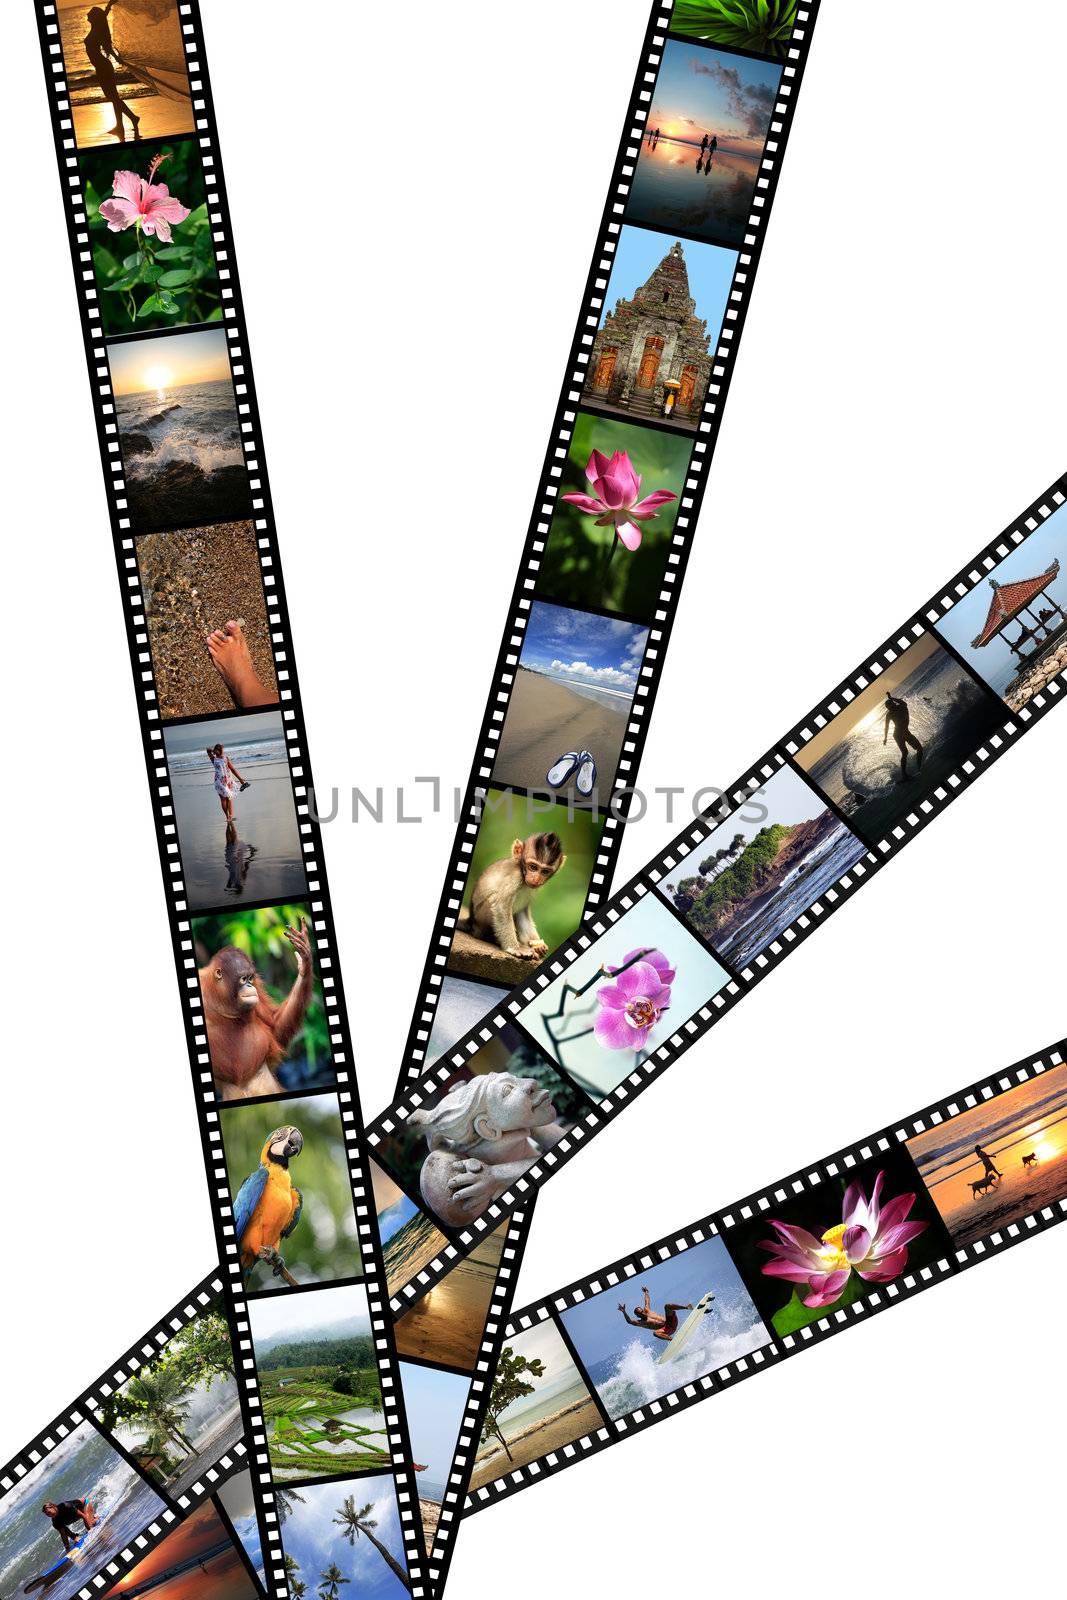 Film strips with travel photos. Indonesia